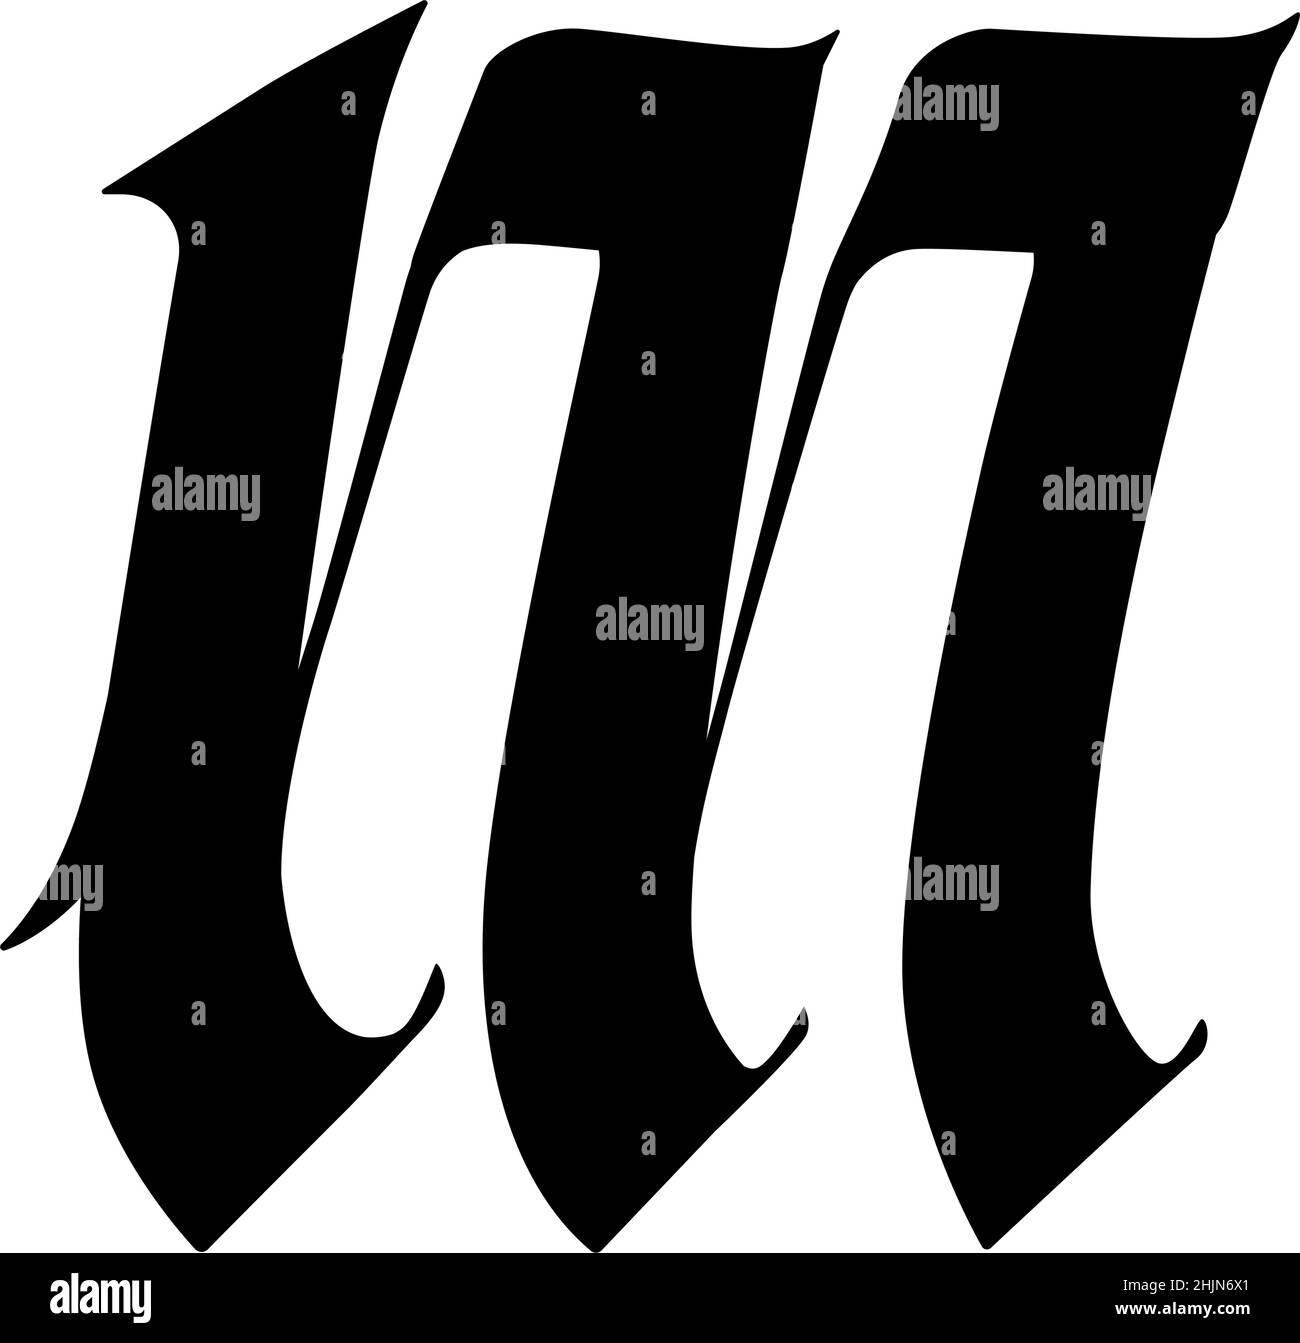 https://c8.alamy.com/comp/2HJN6X1/the-letter-m-in-the-gothic-style-vector-old-alphabet-the-symbol-is-isolated-on-a-white-background-calligraphic-medieval-latin-letter-logo-for-th-2HJN6X1.jpg